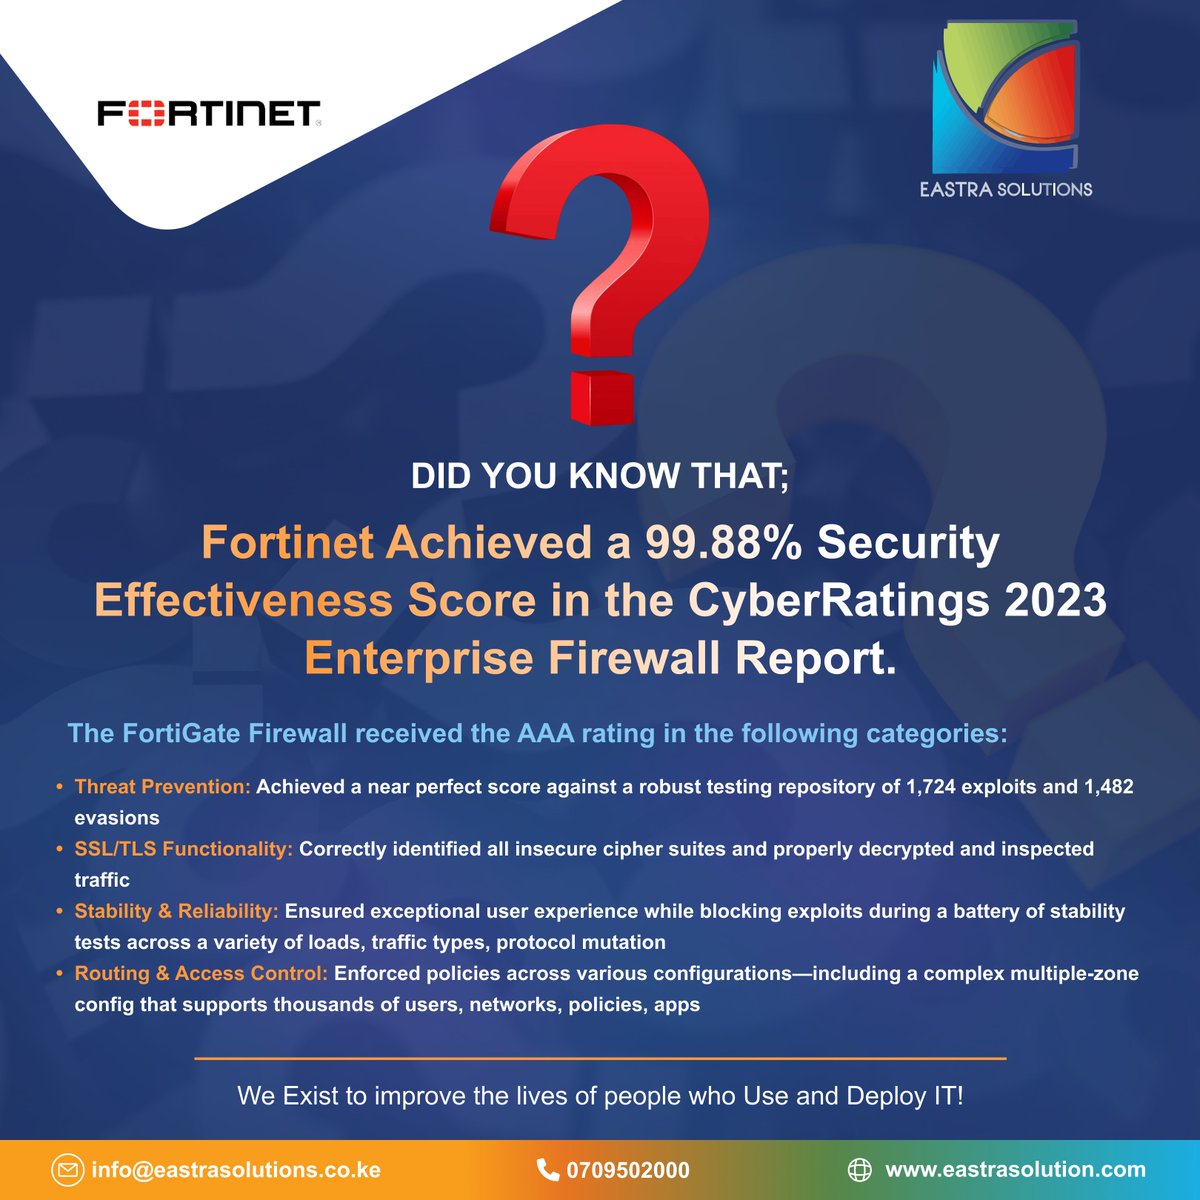 Now you know😉

#itsecuritysolutions #firewall #fortinet